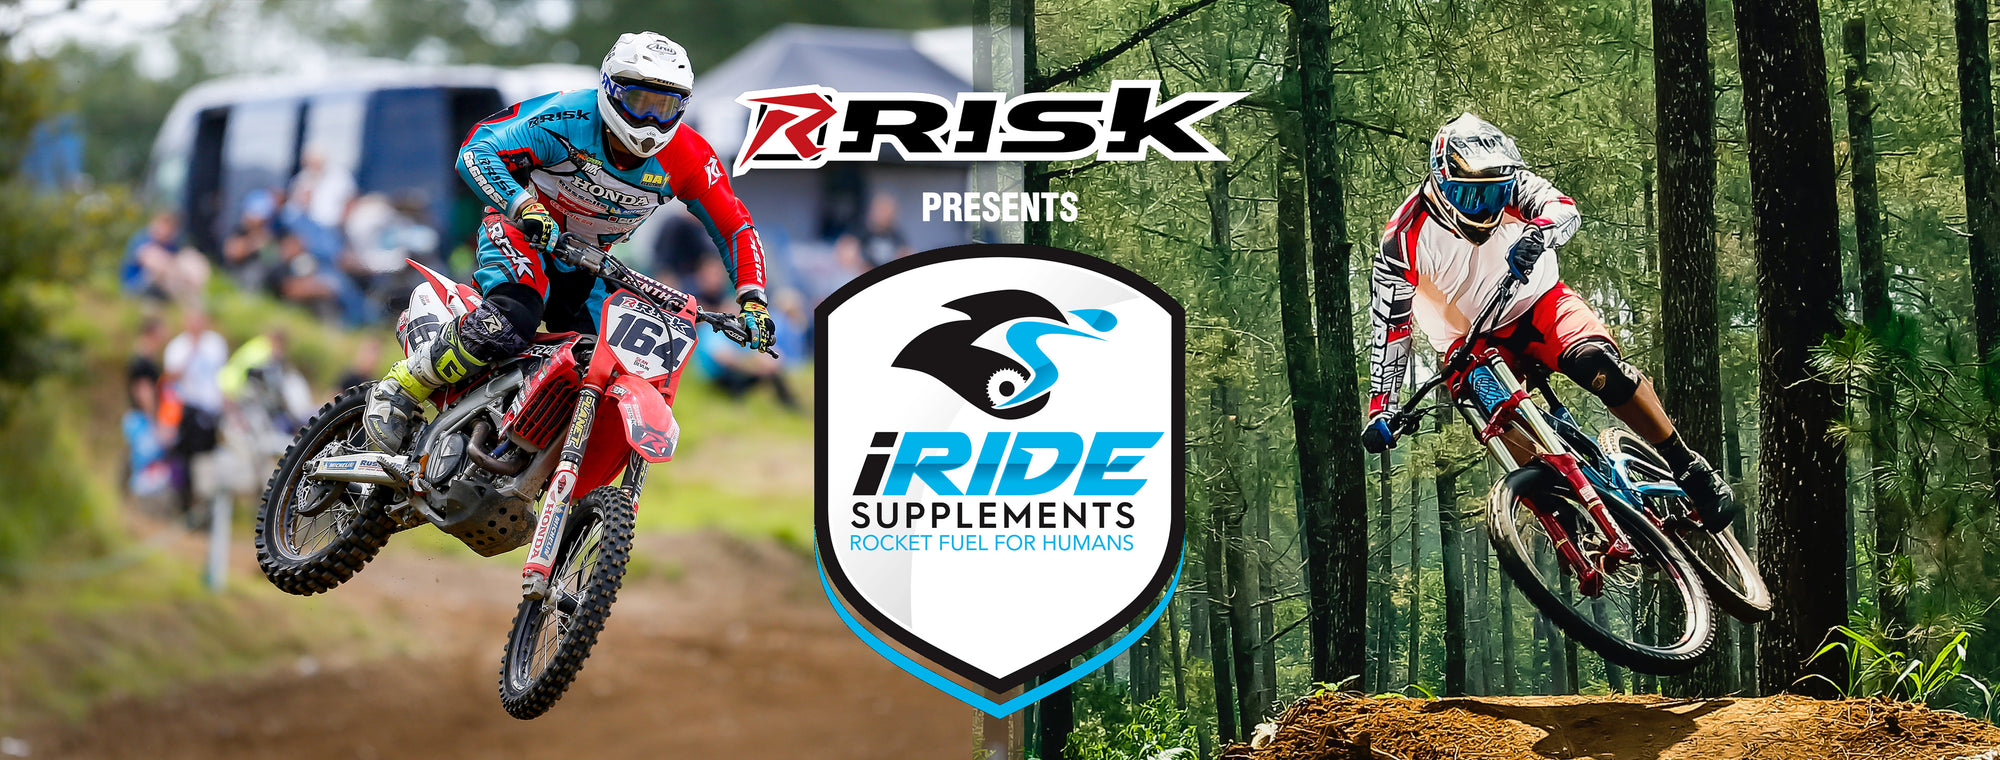 Motocross rider & mountain bike rider split image with graphics reading RISK Presents iRide Supplements